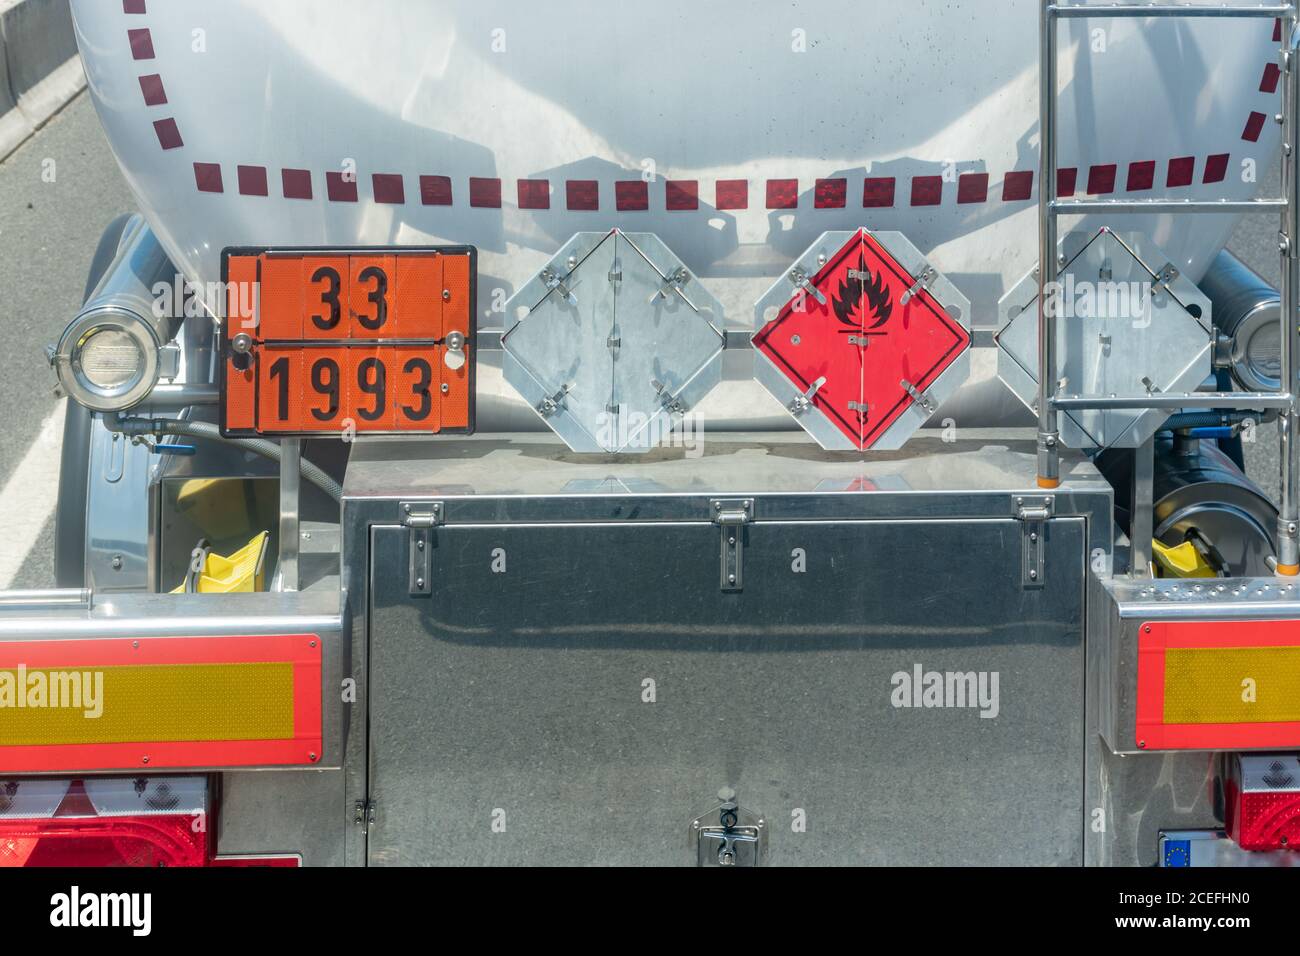 Rear view of a tank truck transporting highly flammable dangerous goods. Stock Photo